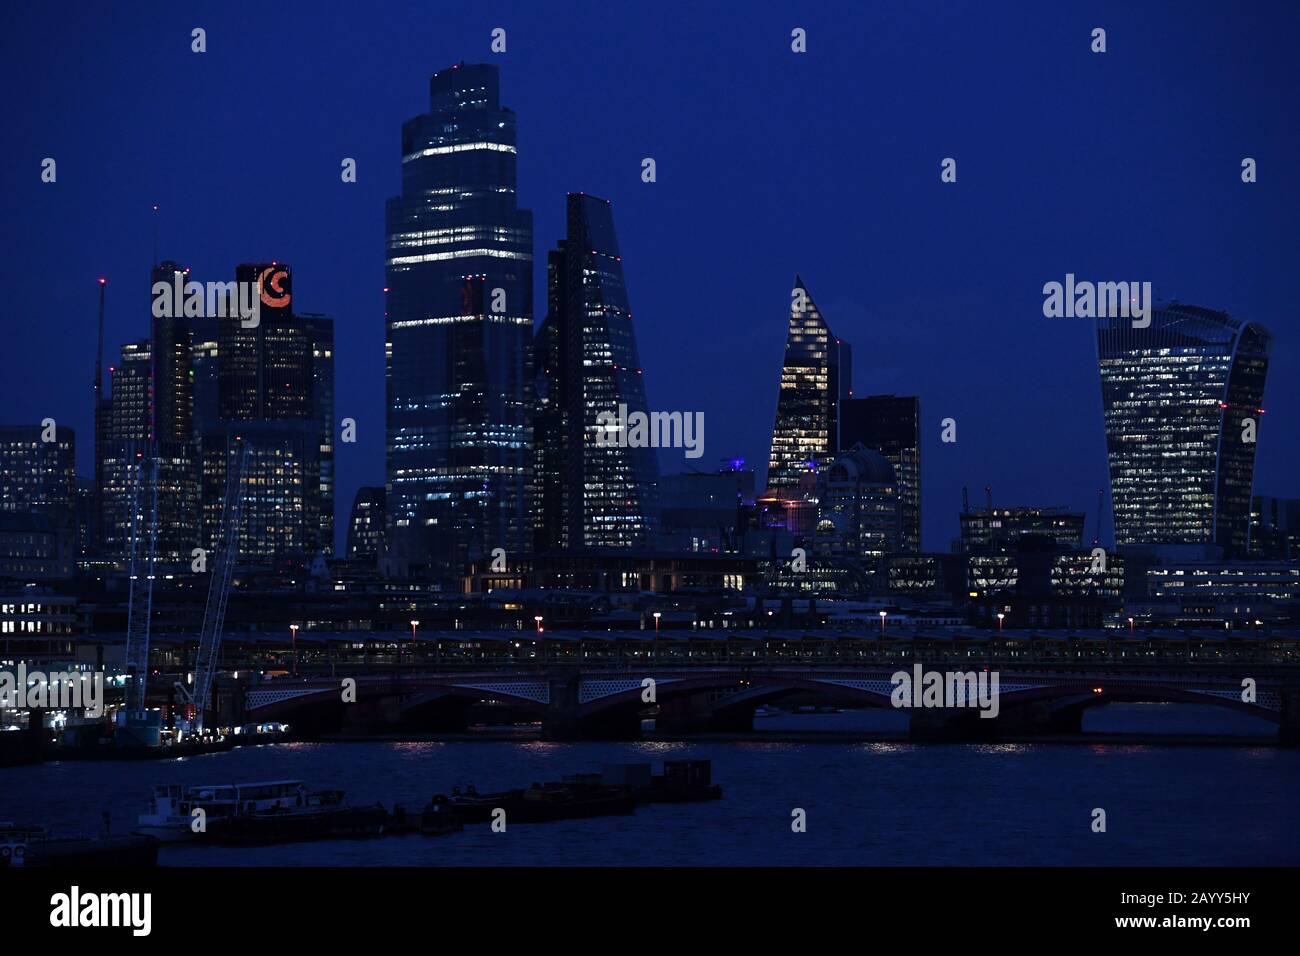 A view of the London Skyline taken from Waterloo Bridge, Tower 42, 22 Bishopsgate, the Leadenhall Building (also known as the Cheesegrater), and 20 Fenchurch Street (also known as the Walkie Talkie). PA Photo. Picture date: Monday February 17, 2020. Photo credit should read: Kirsty O'Connor/PA Wire Stock Photo